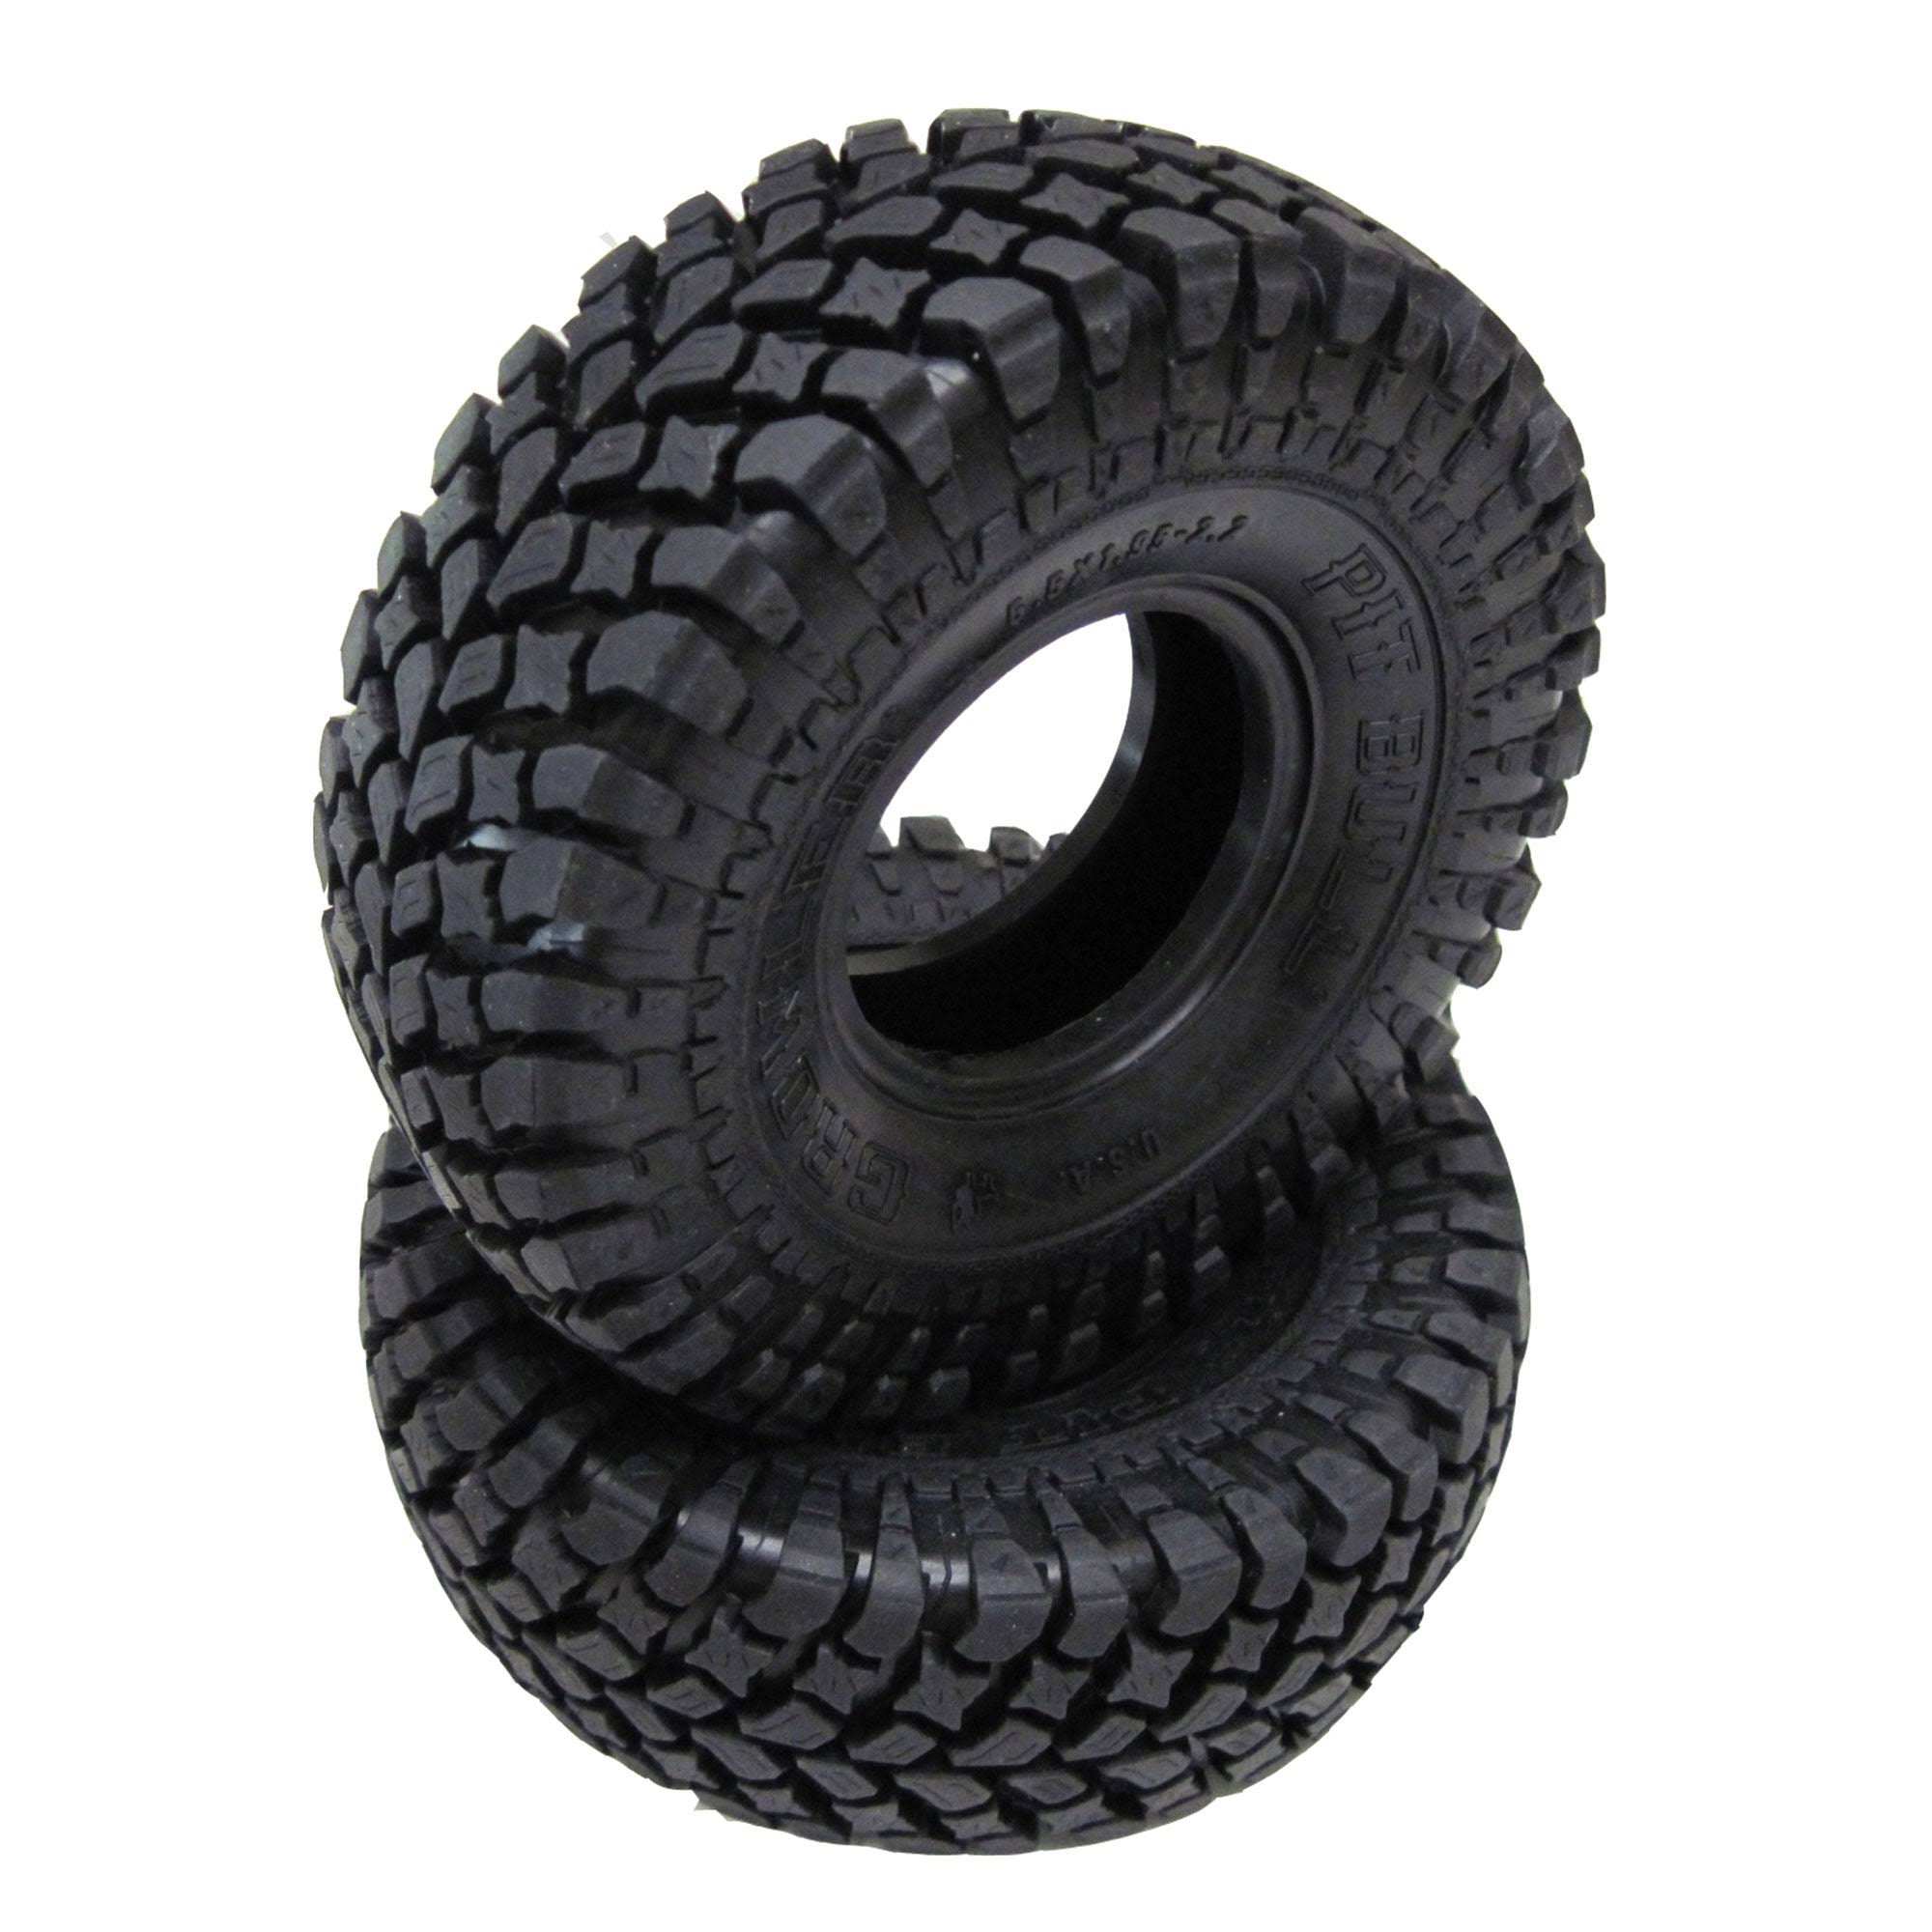 Pit Bull RC PB9008NK Growler At Extra Scale Tires - With Pap, 2.2"